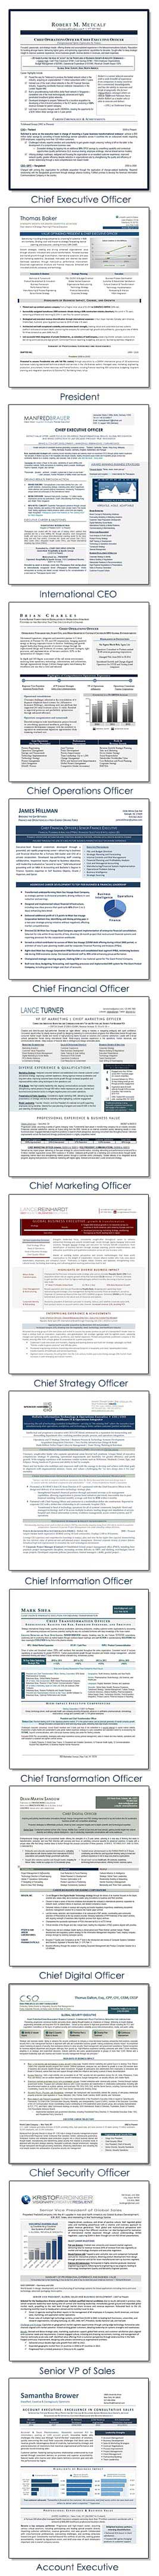 The 8 Best Executive Resume Writing Services of 